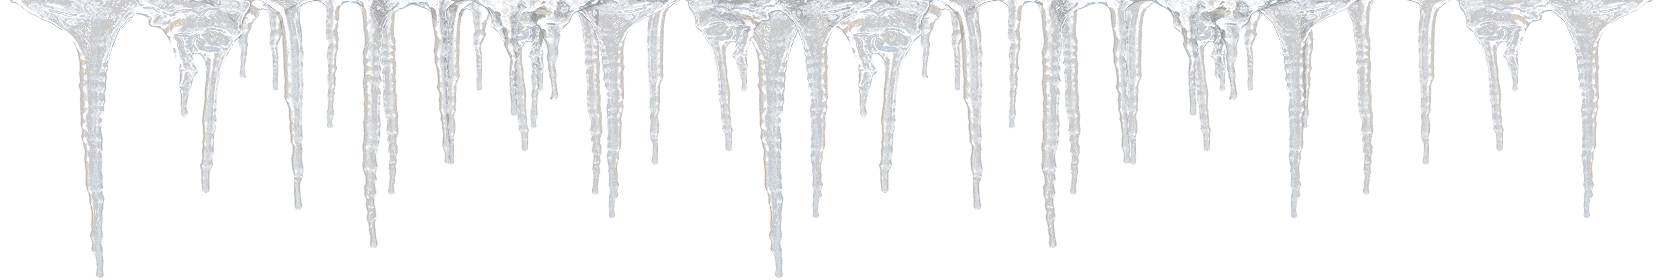 Icicles Png Image - Icicle, Transparent background PNG HD thumbnail